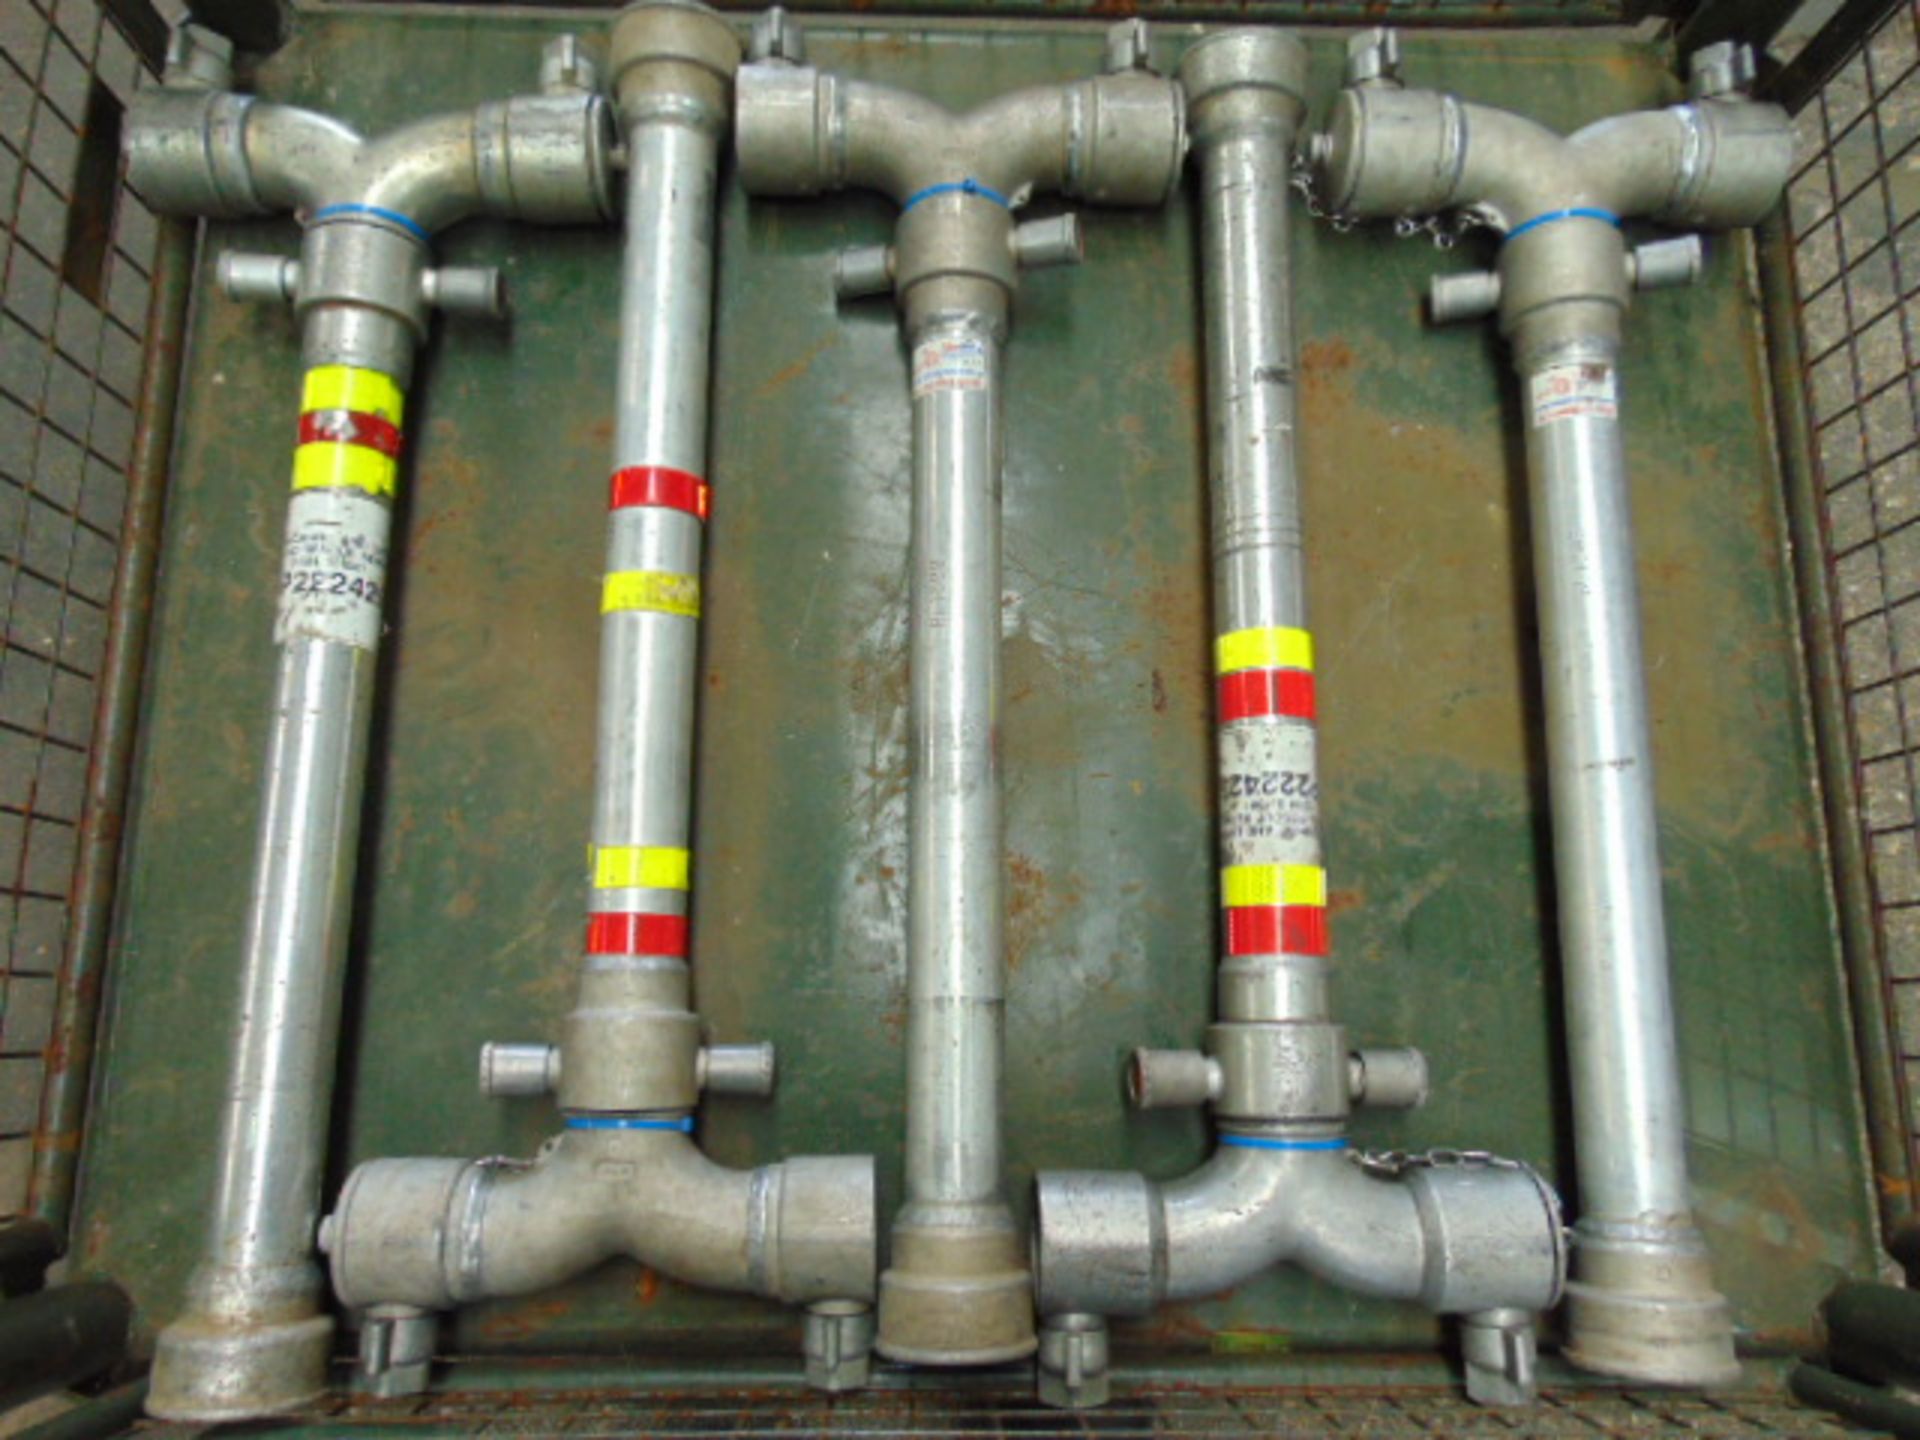 5 x Double Headed Standpipes